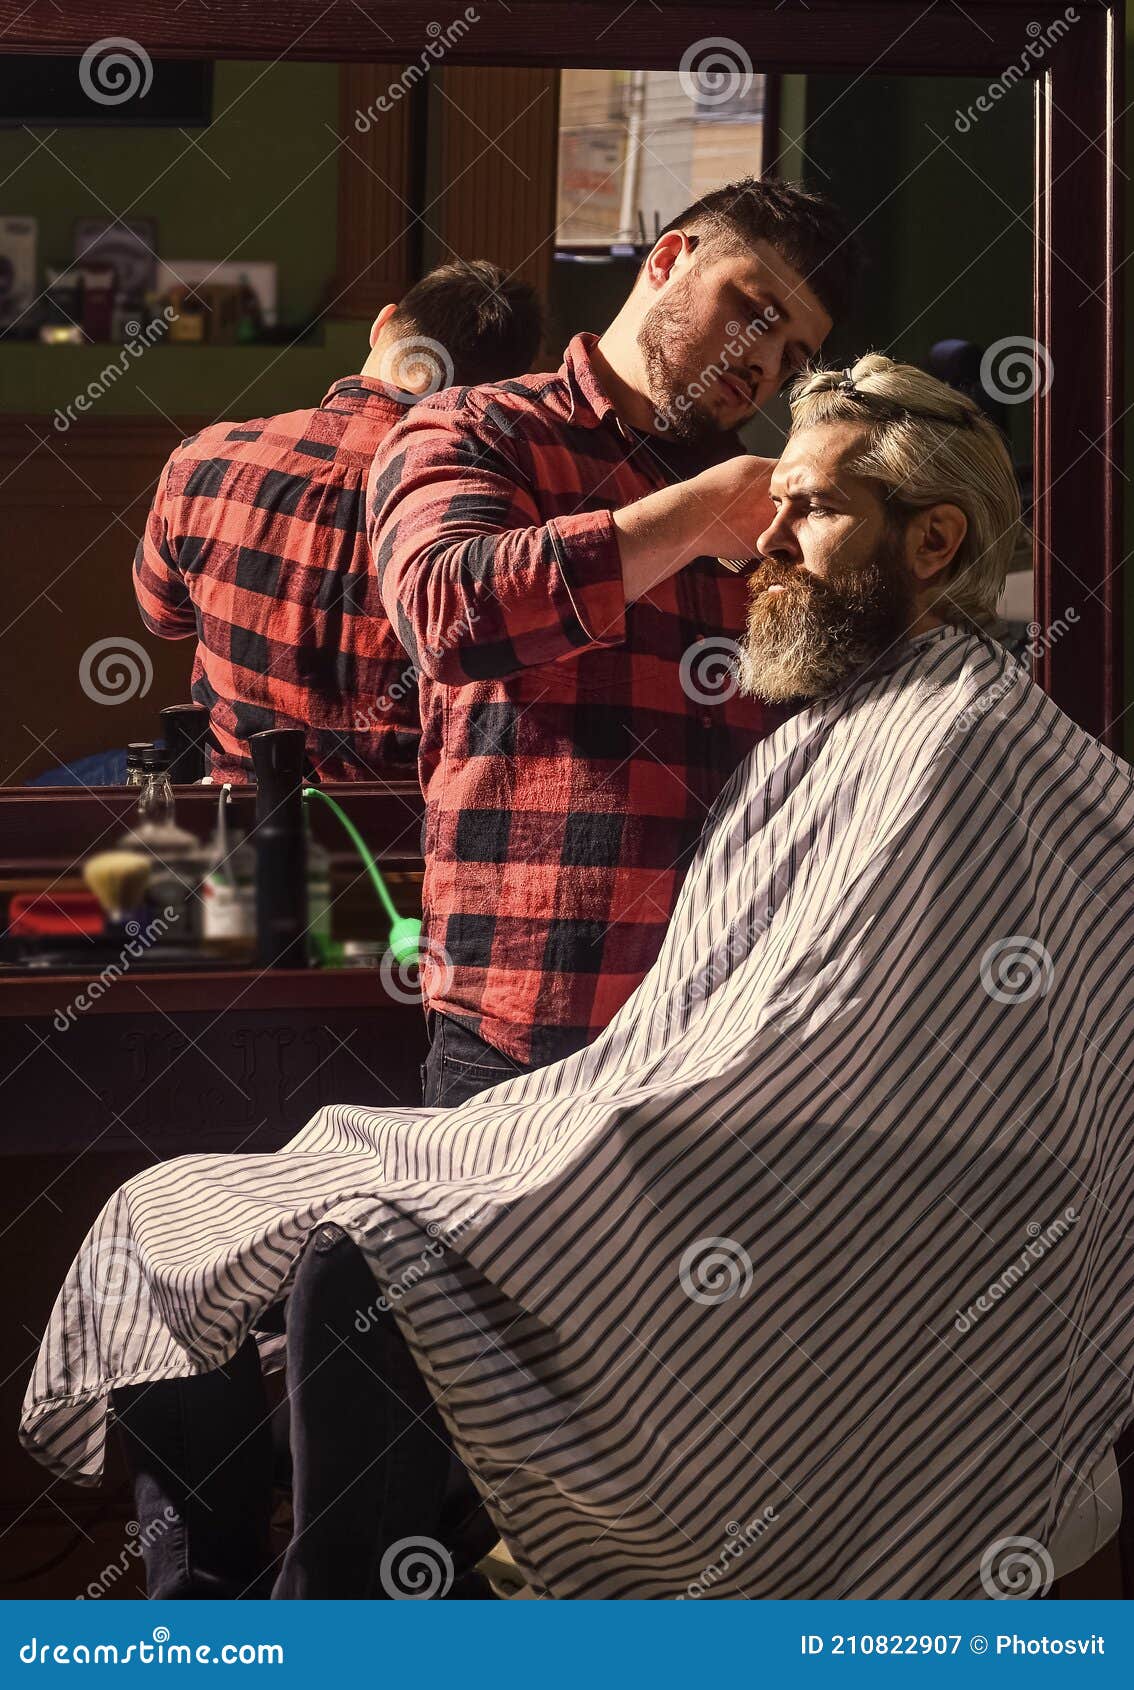 Sharp Object Near Face and Squirming Distracts Person Holding it. Donate  Hair. Donation and Charity Concept Stock Image - Image of bearded, brutal:  210822907